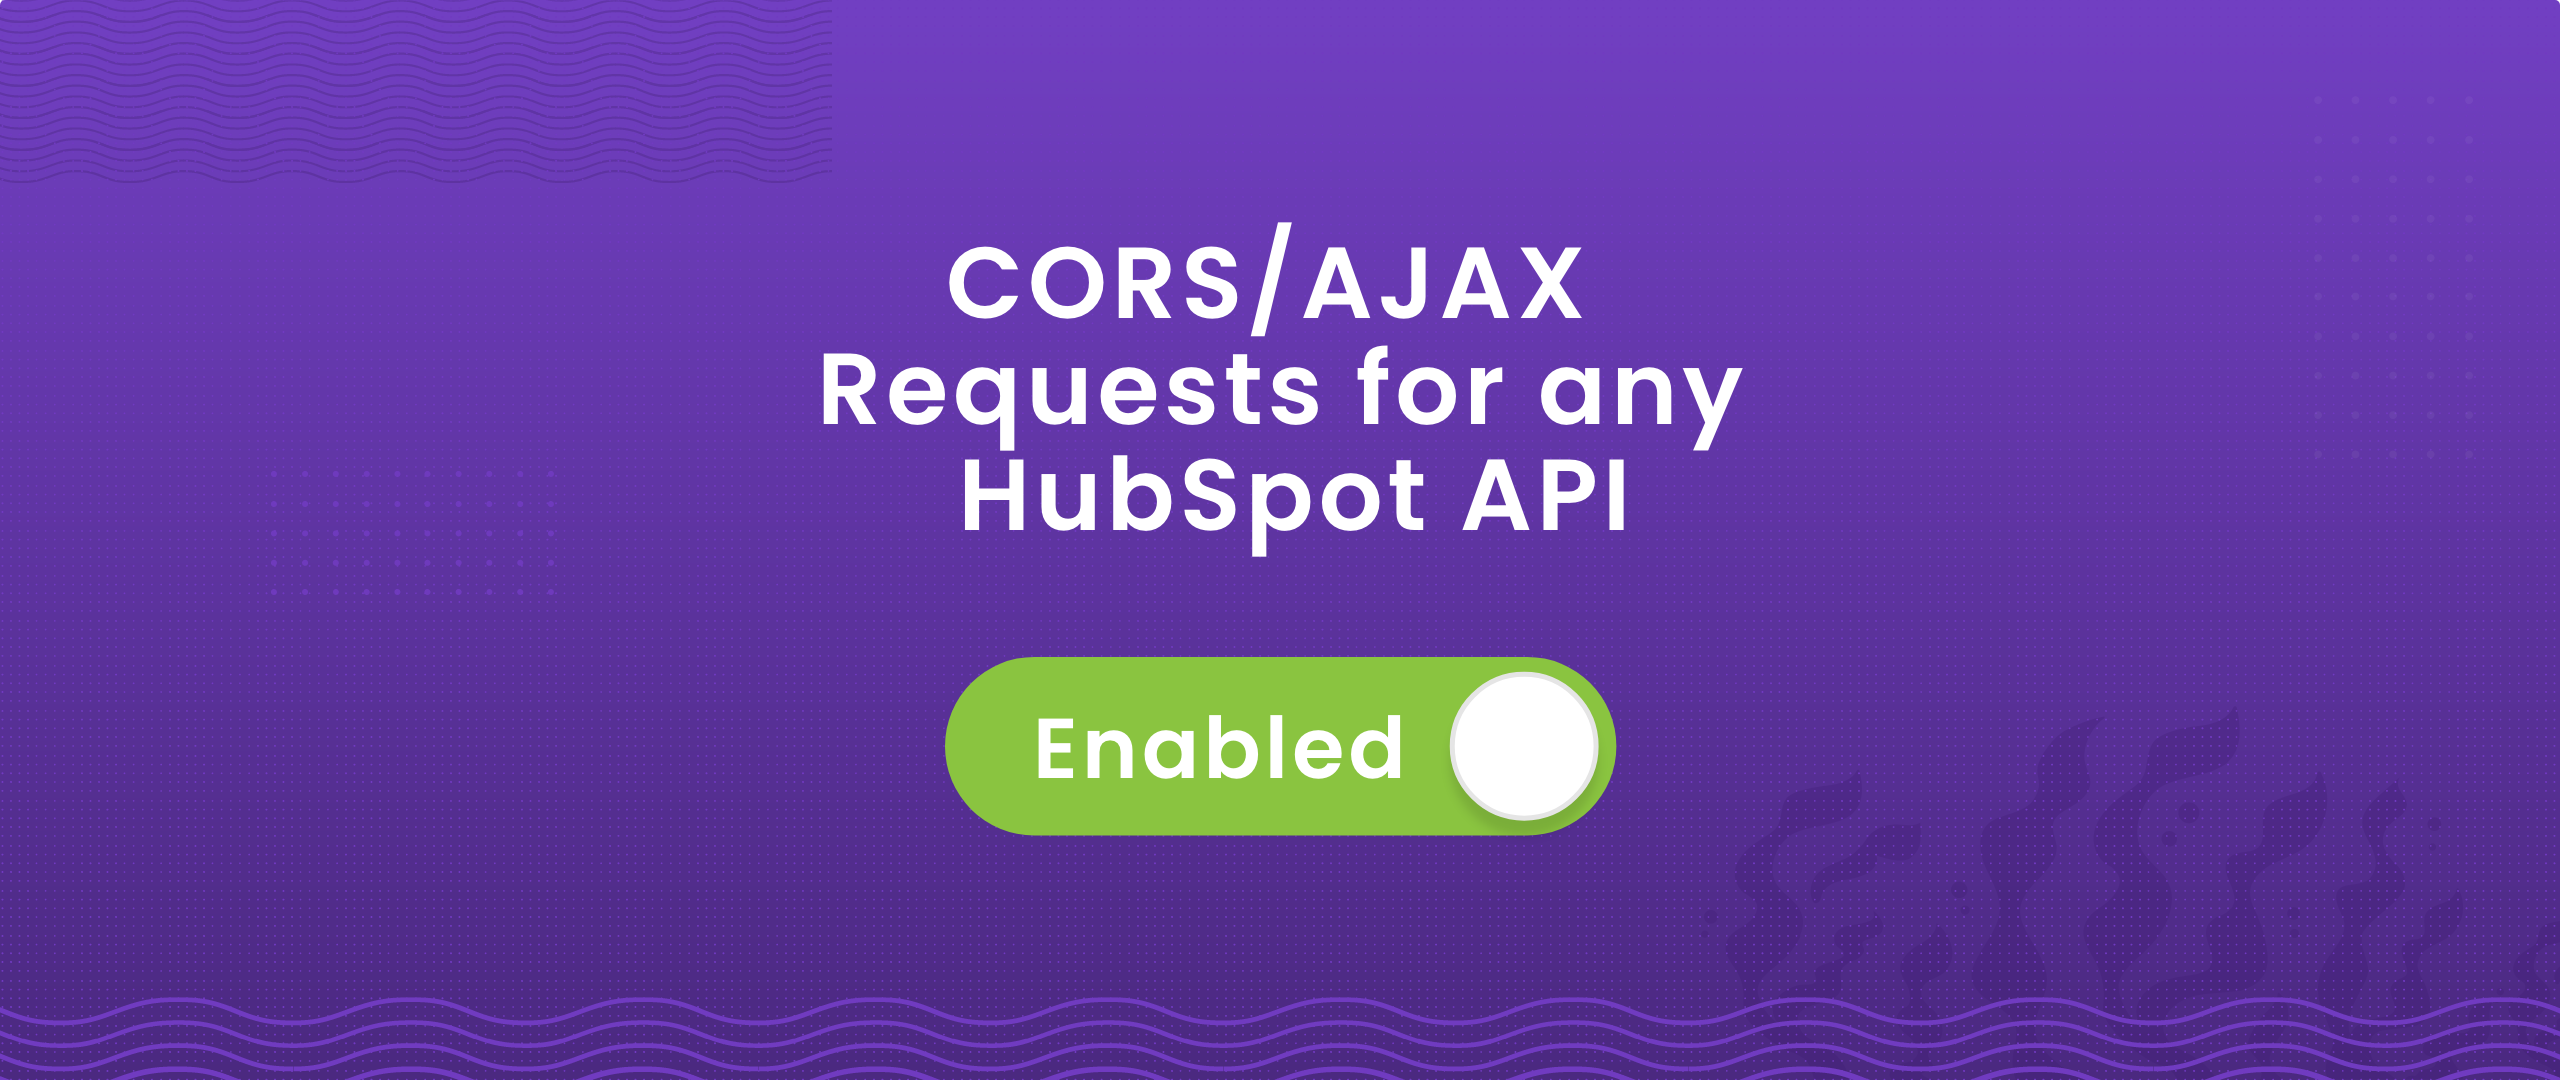 How to Enable CORS/AJAX Requests for any HubSpot API